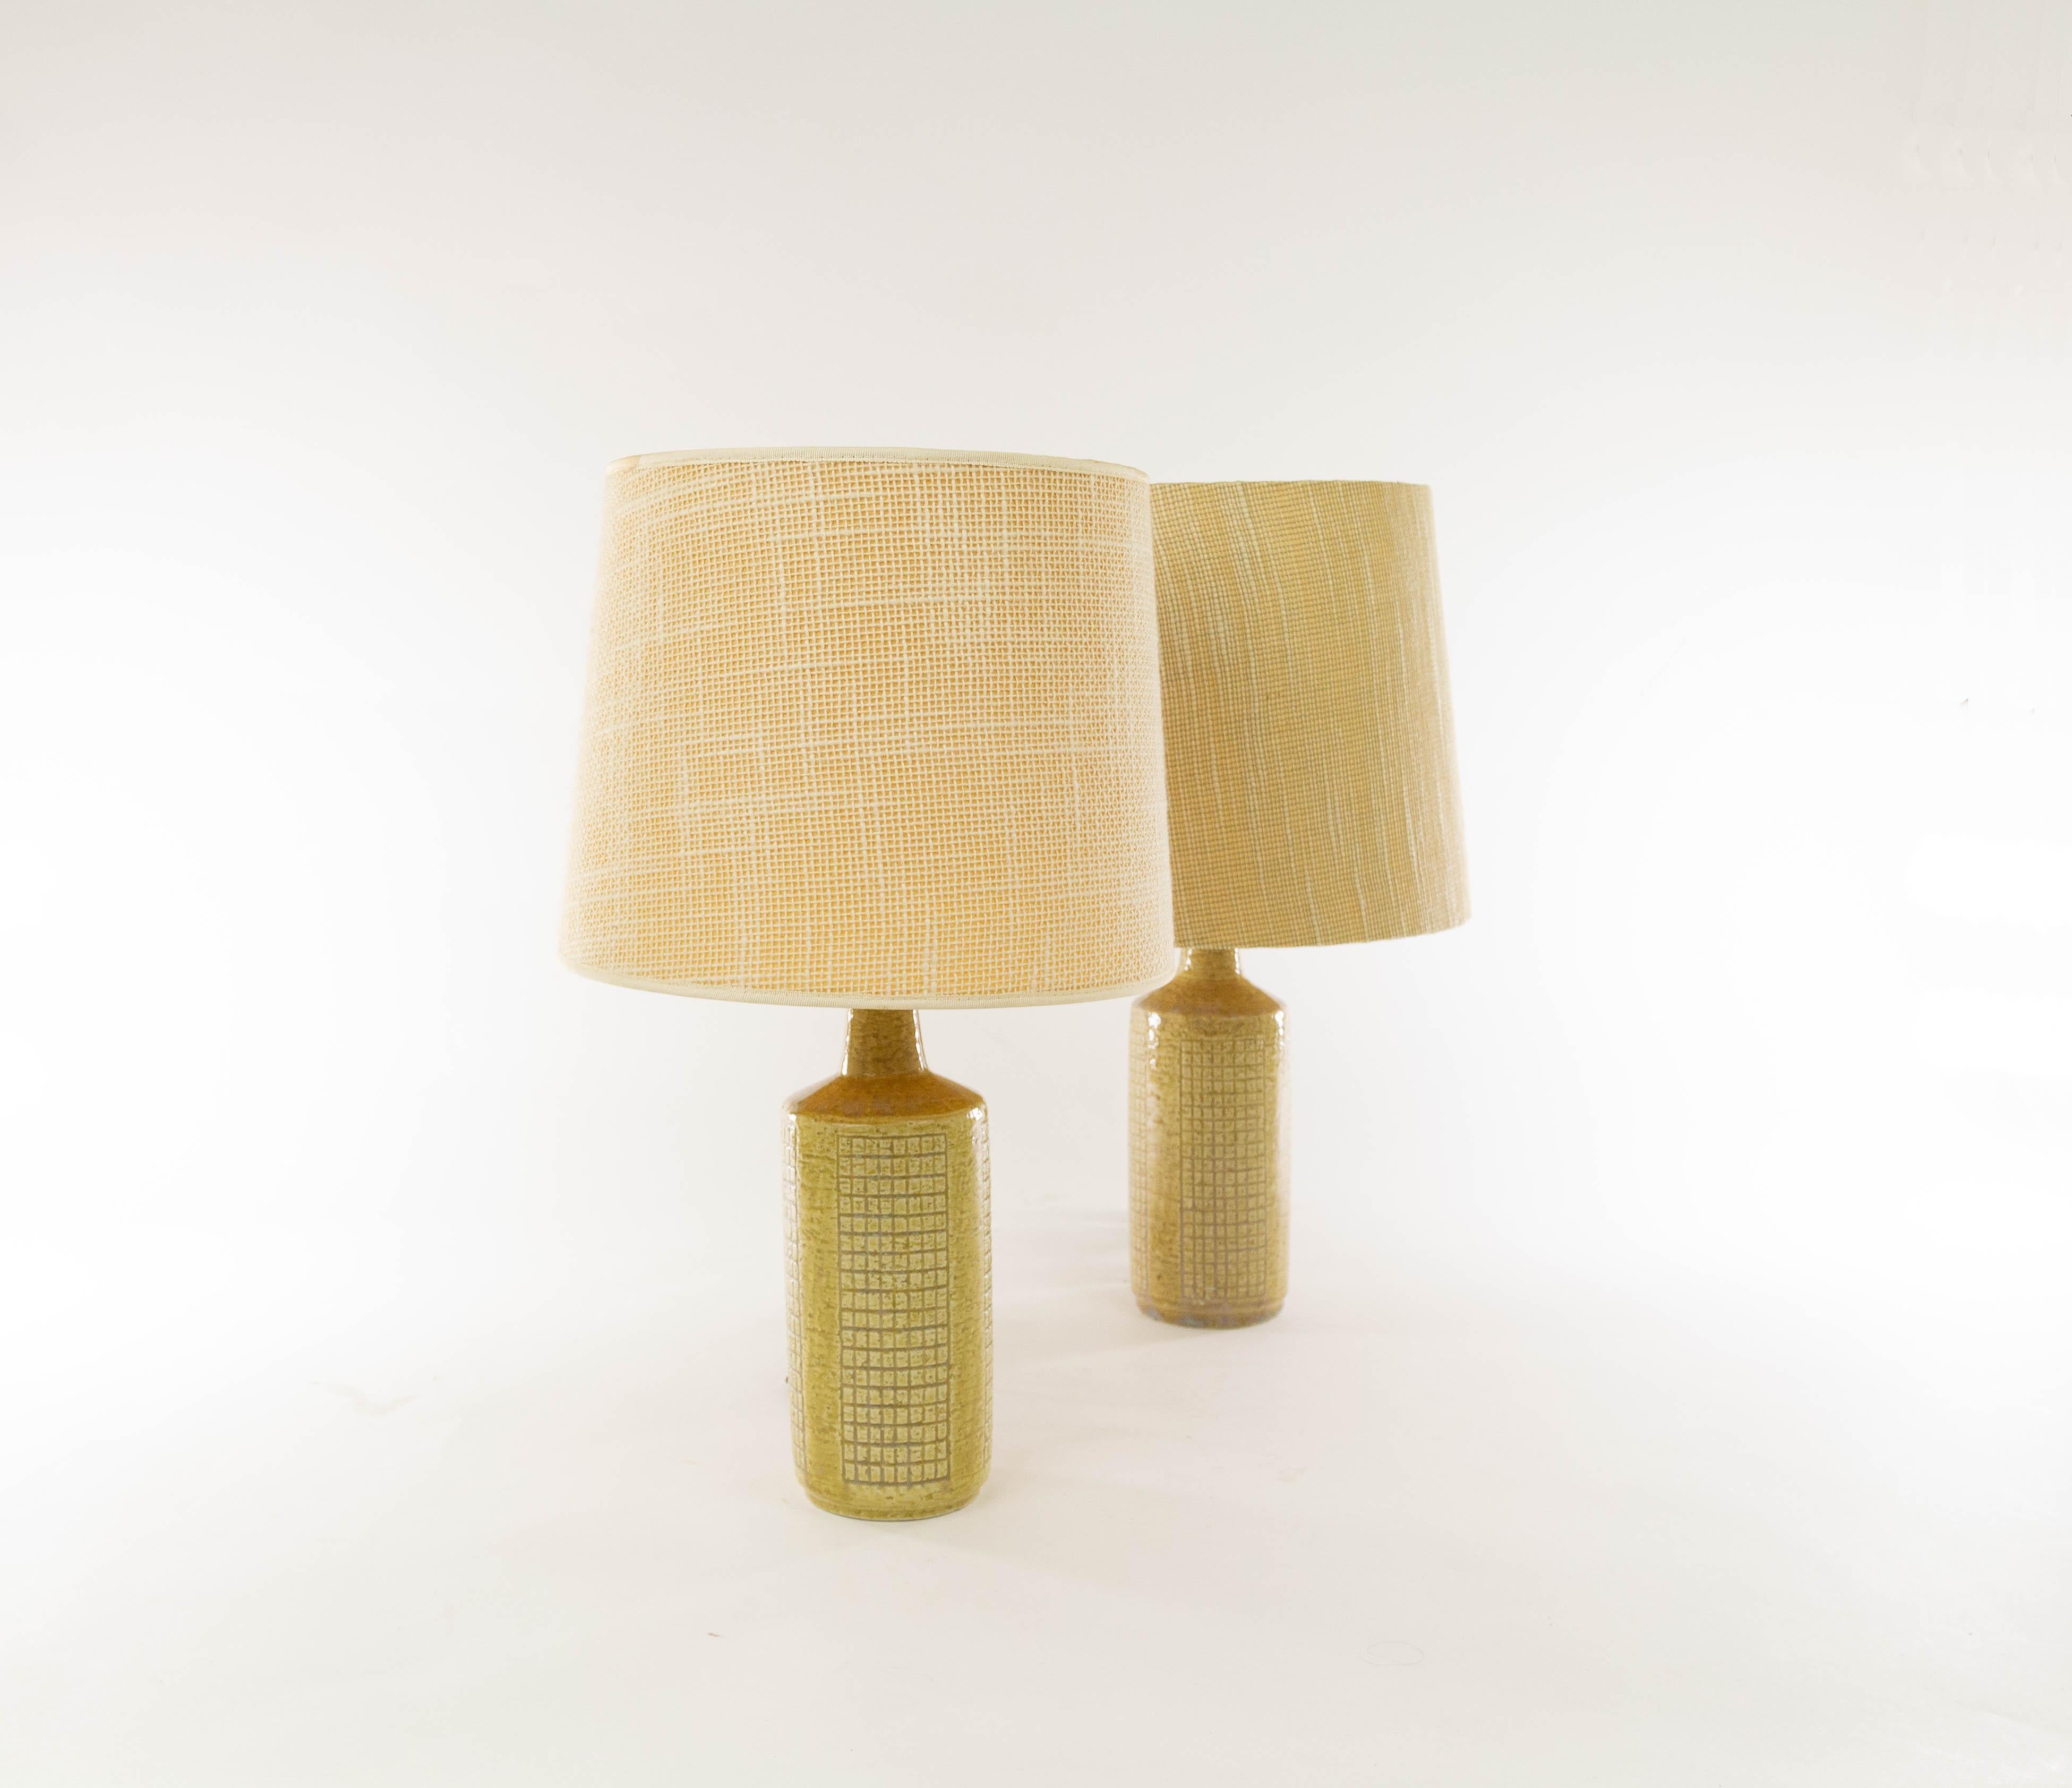 A pair of DL/30 table lamps made by Annelise and Per Linnemann-Schmidt for Palshus in the 1960s. 

The colour of both pieces is beige or 'grain'. Although both pieces are very similar, they are not exactly the same. There may be small differences in